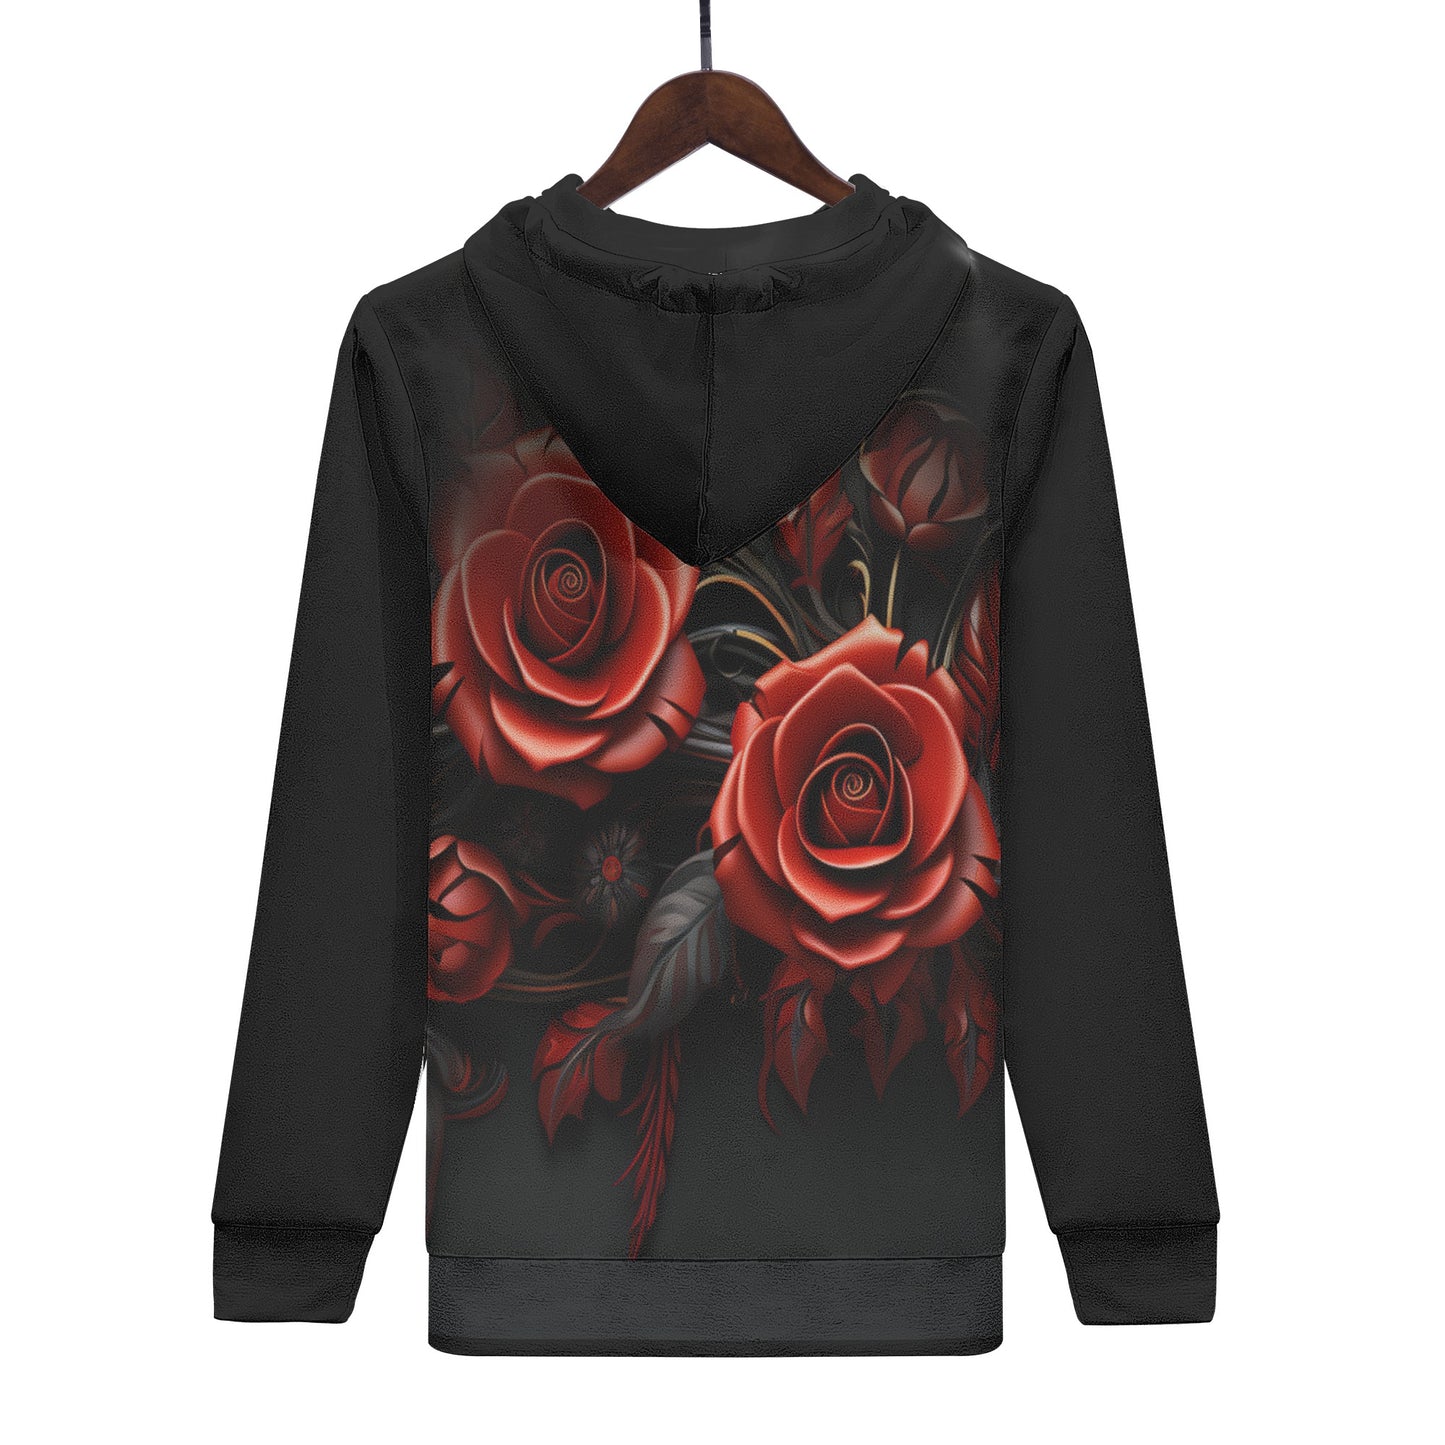 Neduz Designs Mens Hoodie with Rose Print - Comfortable and Warm Daily Wear